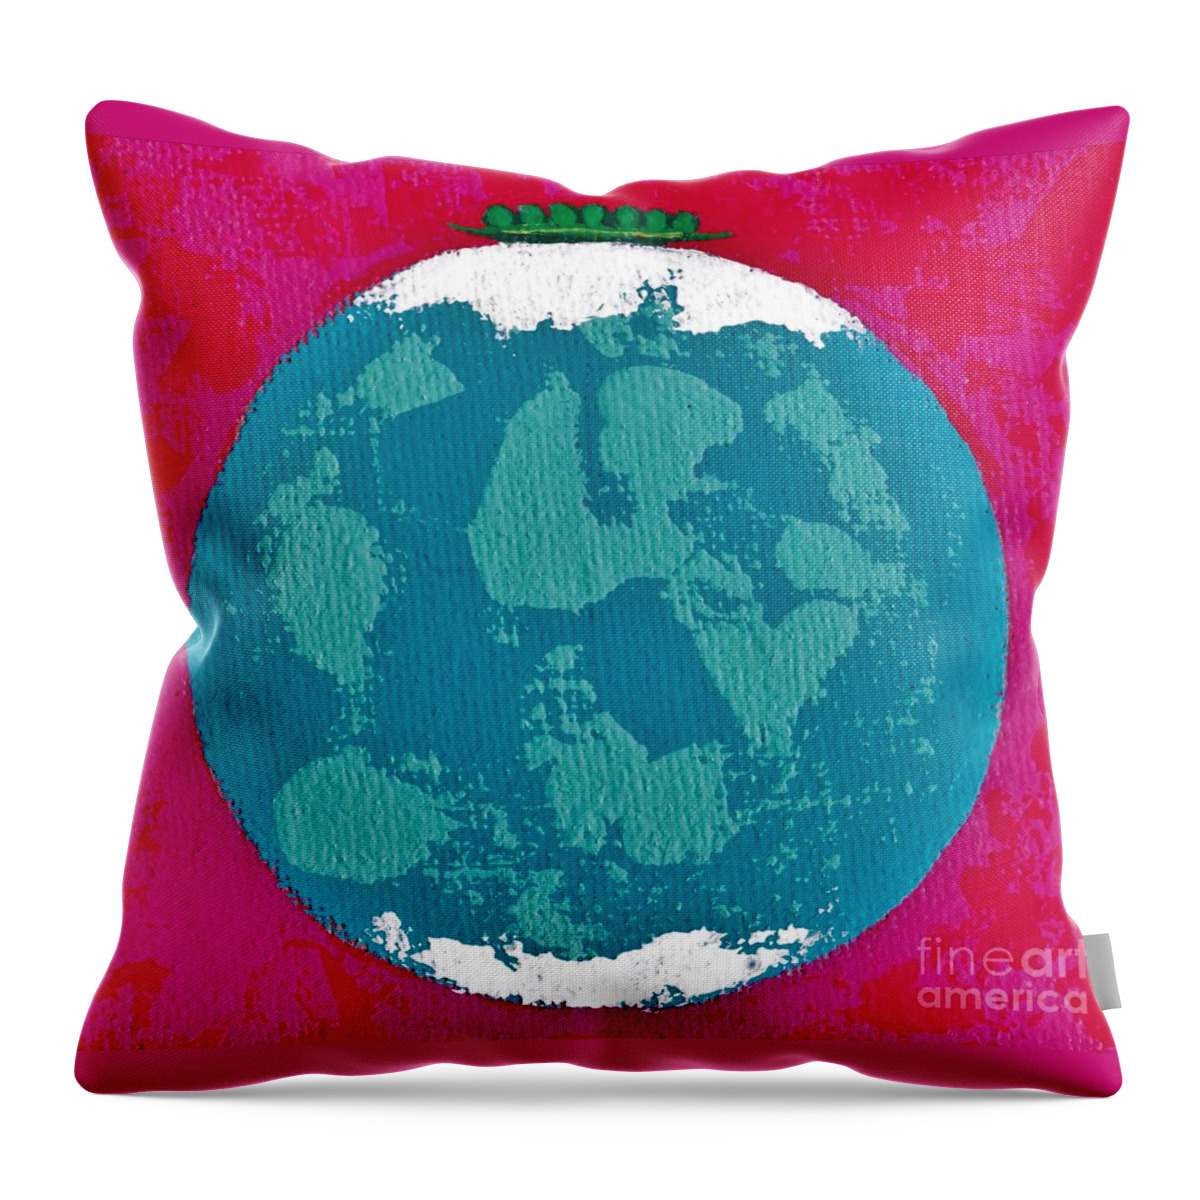 #abstractart #artist #colorful #contemporaryart #earth #expressionism #fineart #followart #iloveart #interiordesign #modernart #newartwork #painting #peas #surreal #surrealism #urban Throw Pillow featuring the painting Peas on Earth by Allison Constantino